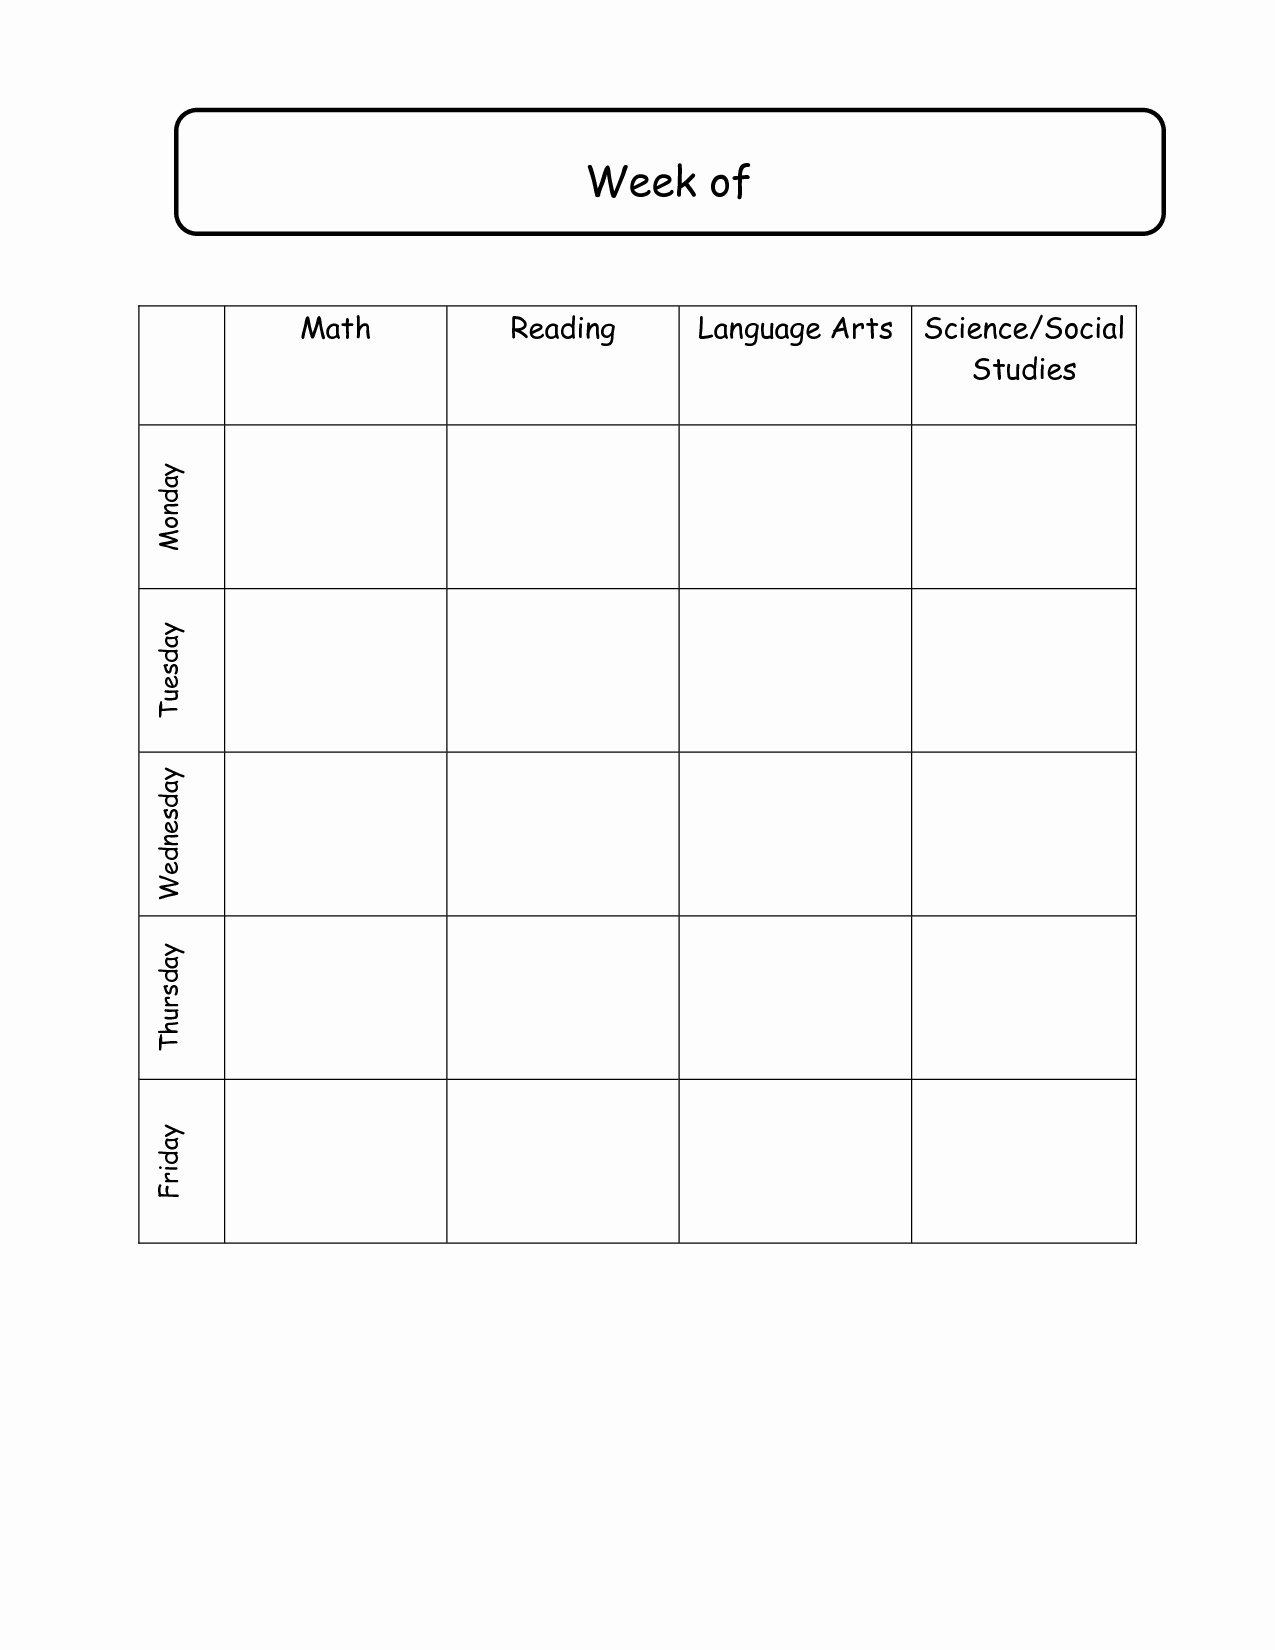 Middle School Schedule Template Lovely Elementary School Daily Schedule Template